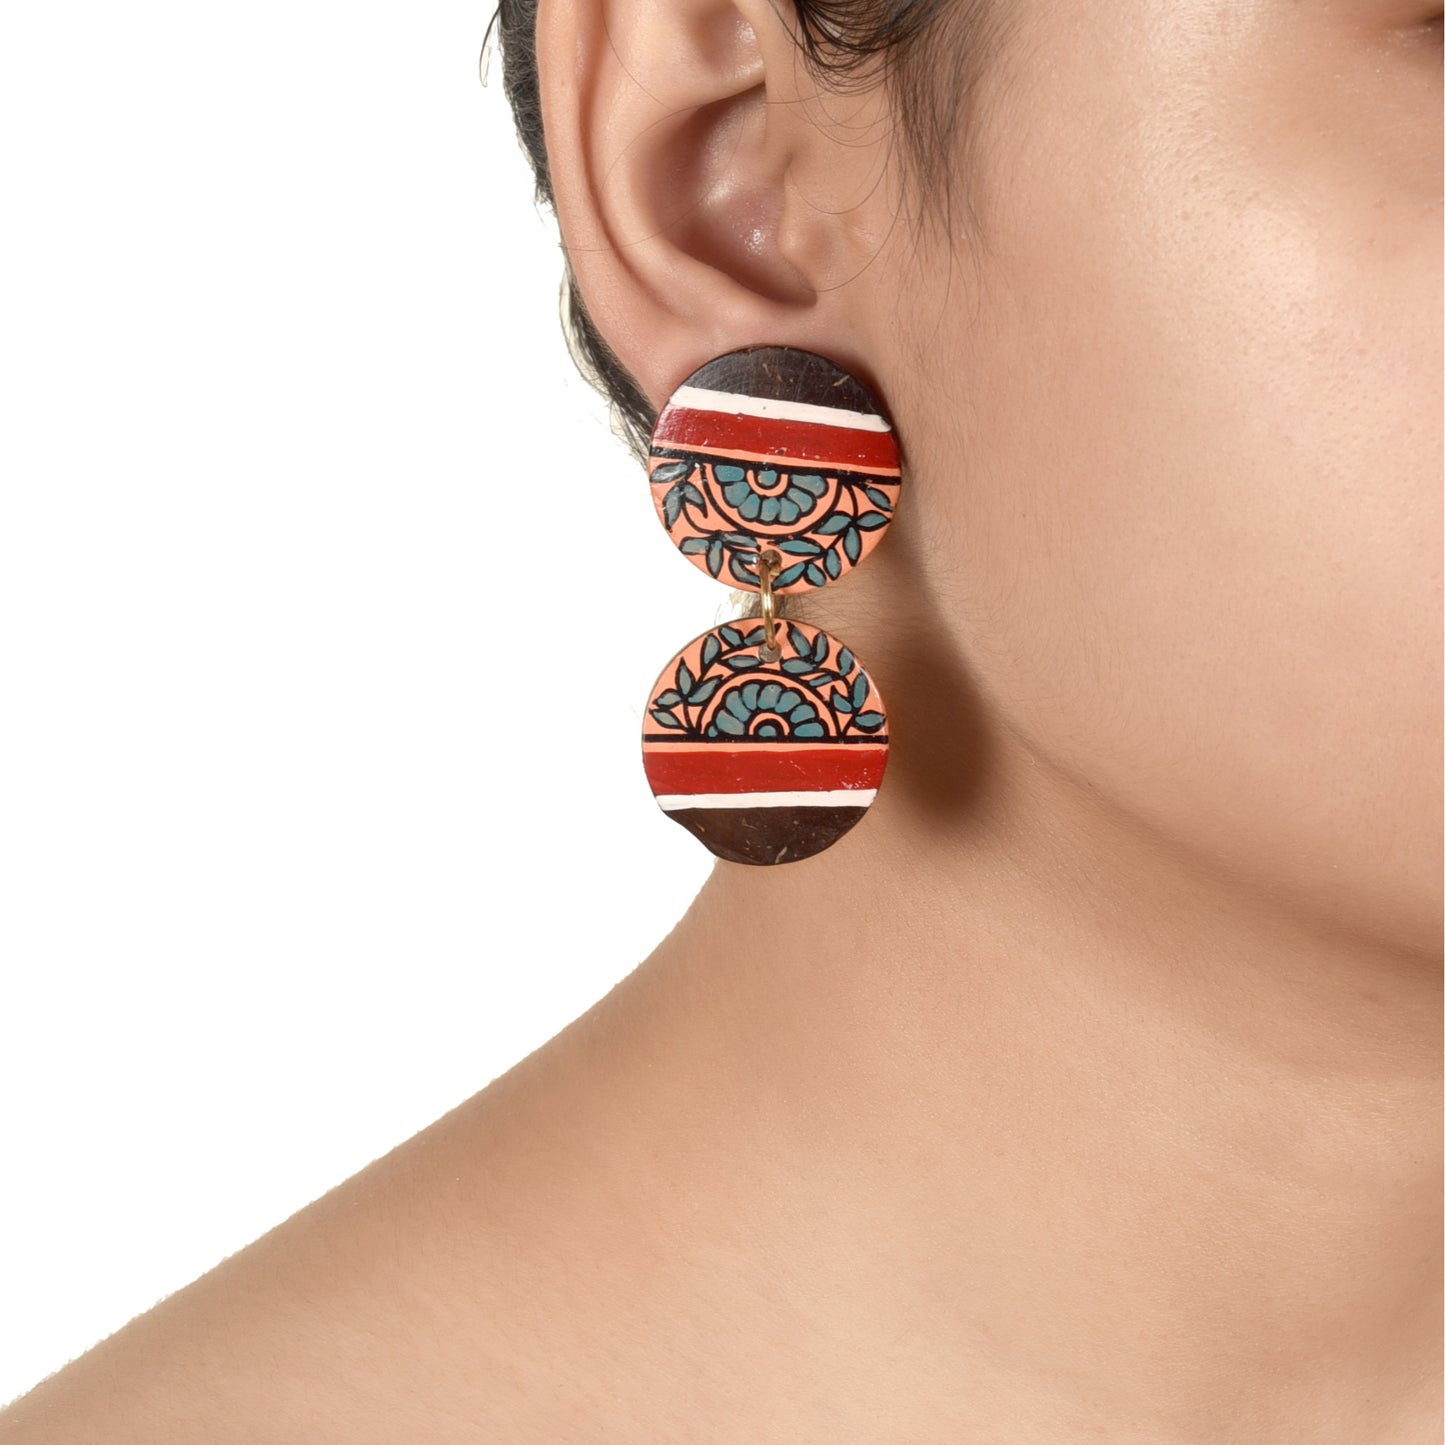 Floral Drops Handcrafted Tribal Wooden Earrings